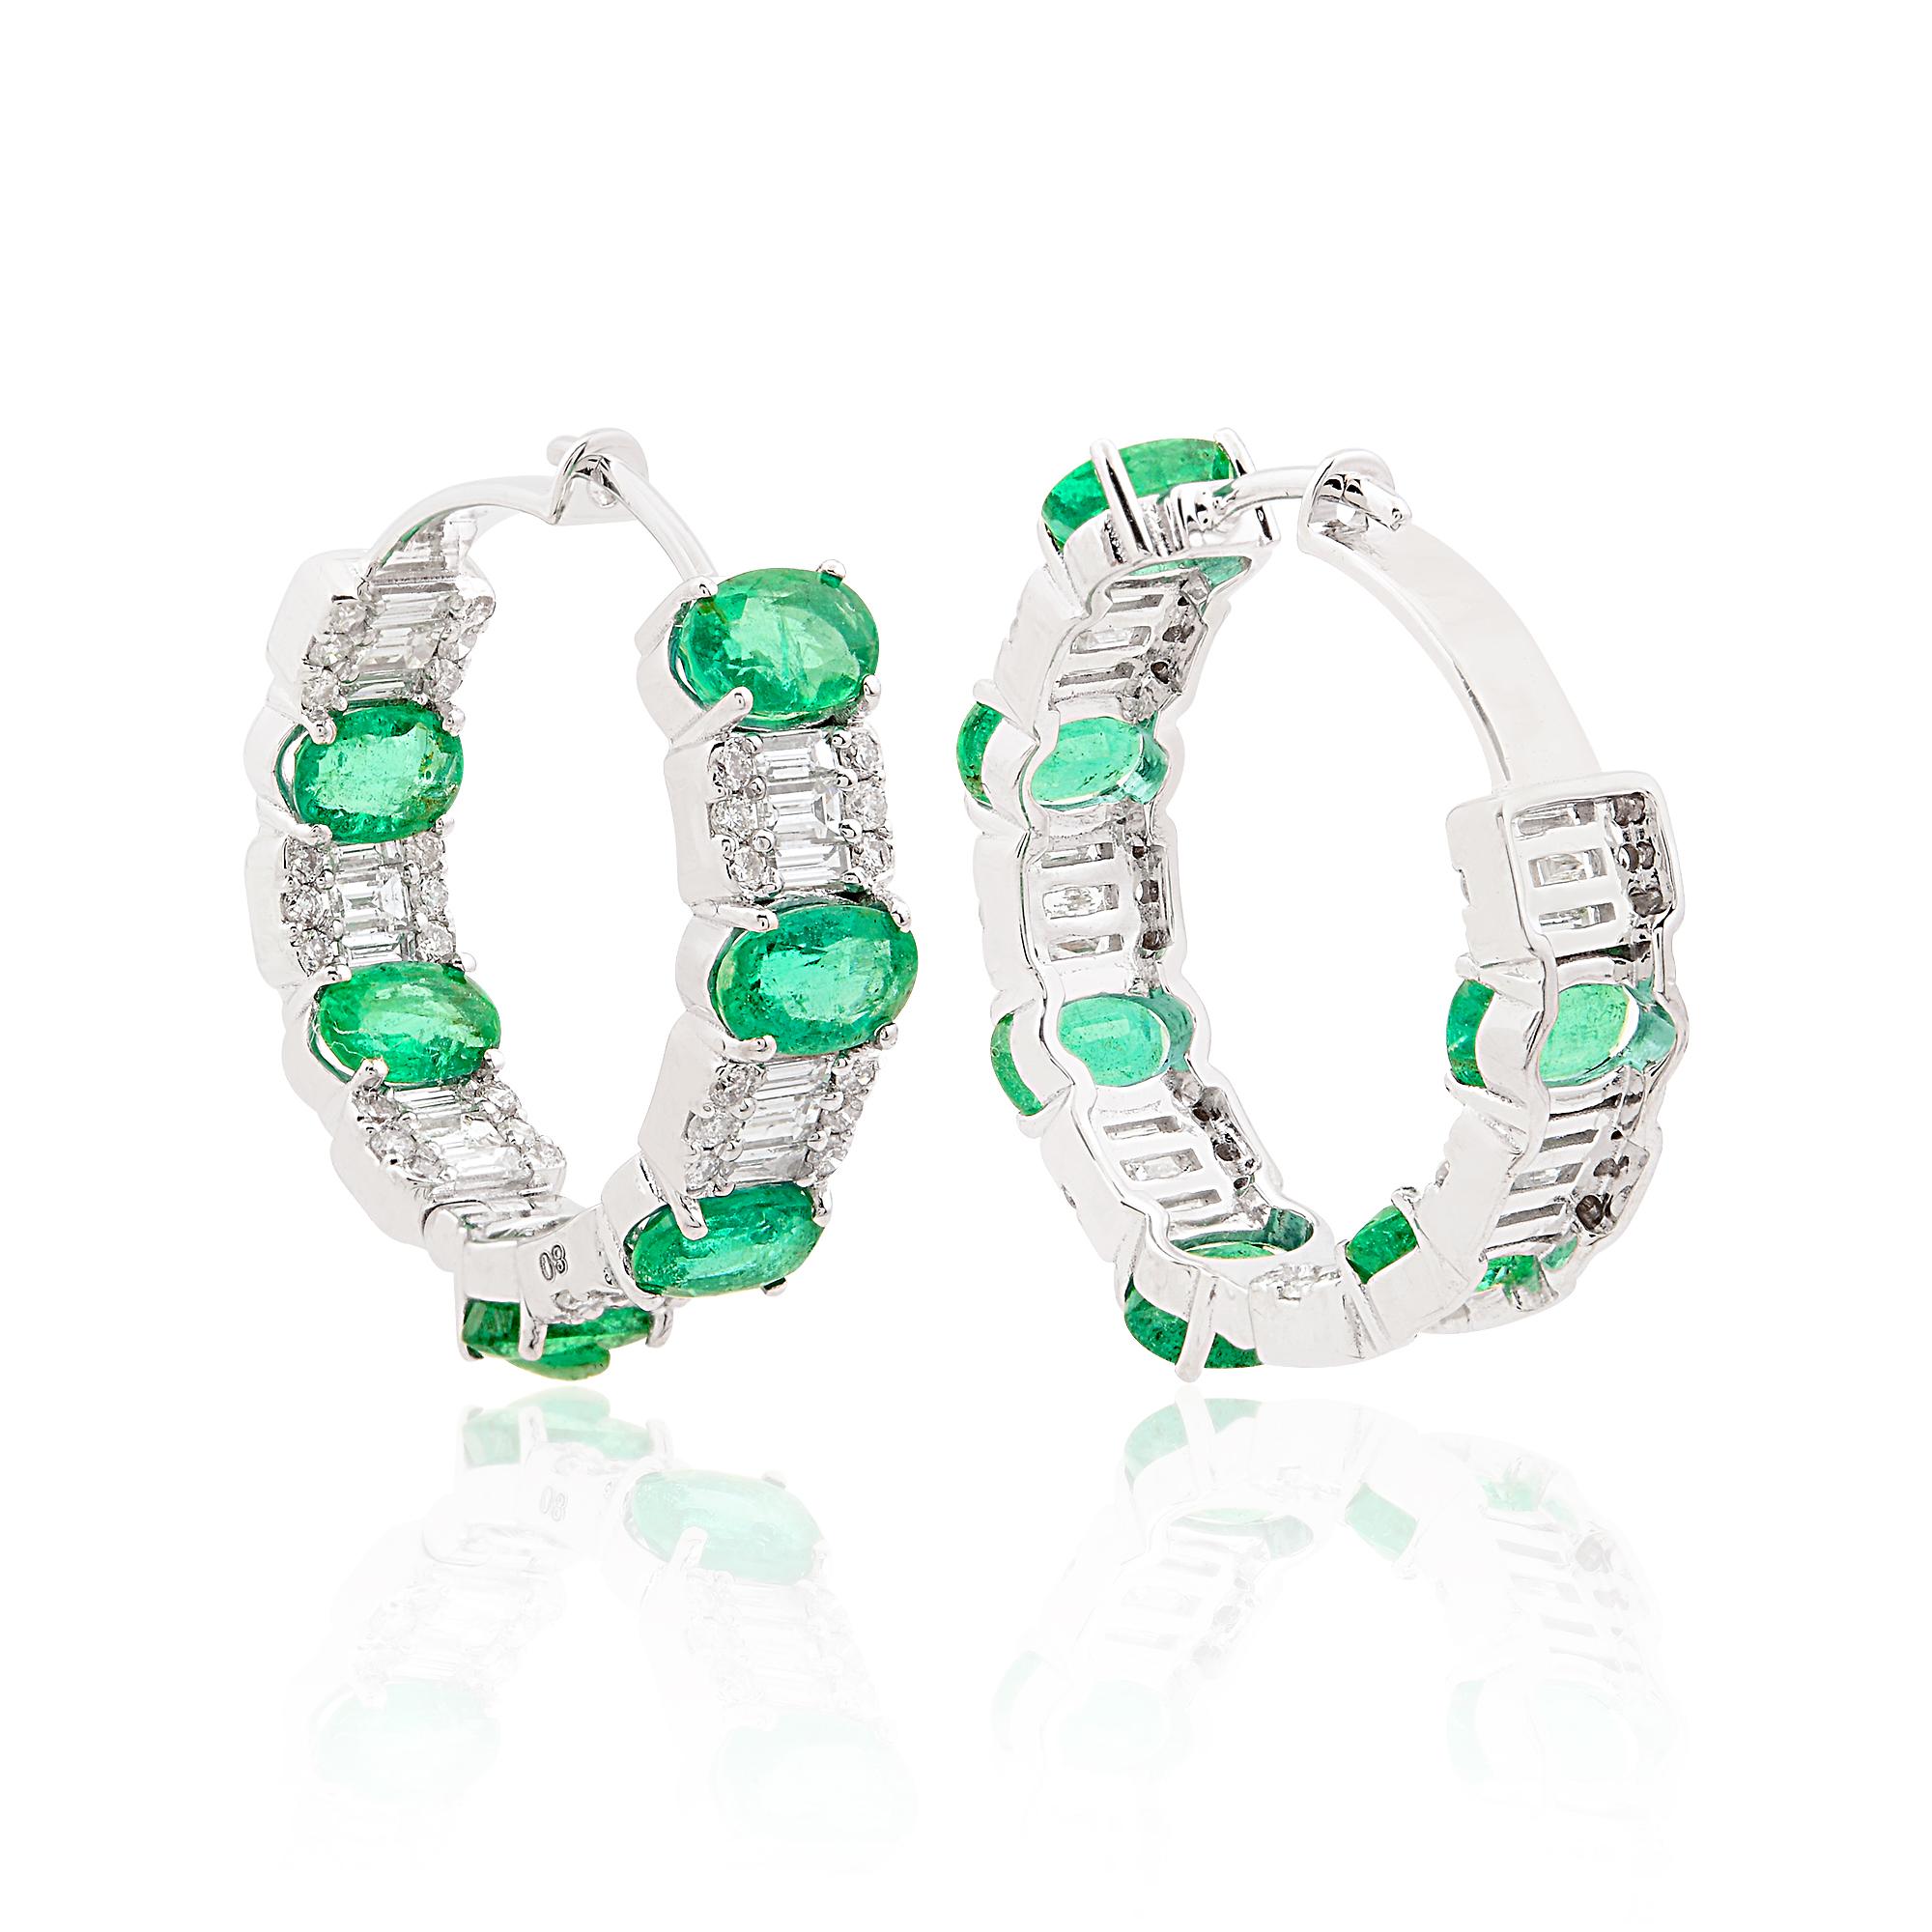 These striking gemstones are expertly set within hoops of 18 karat white gold, a metal renowned for its luminous sheen and timeless appeal. The intricate design of the hoops adds a touch of glamour and flair, enhancing the allure of the emeralds and